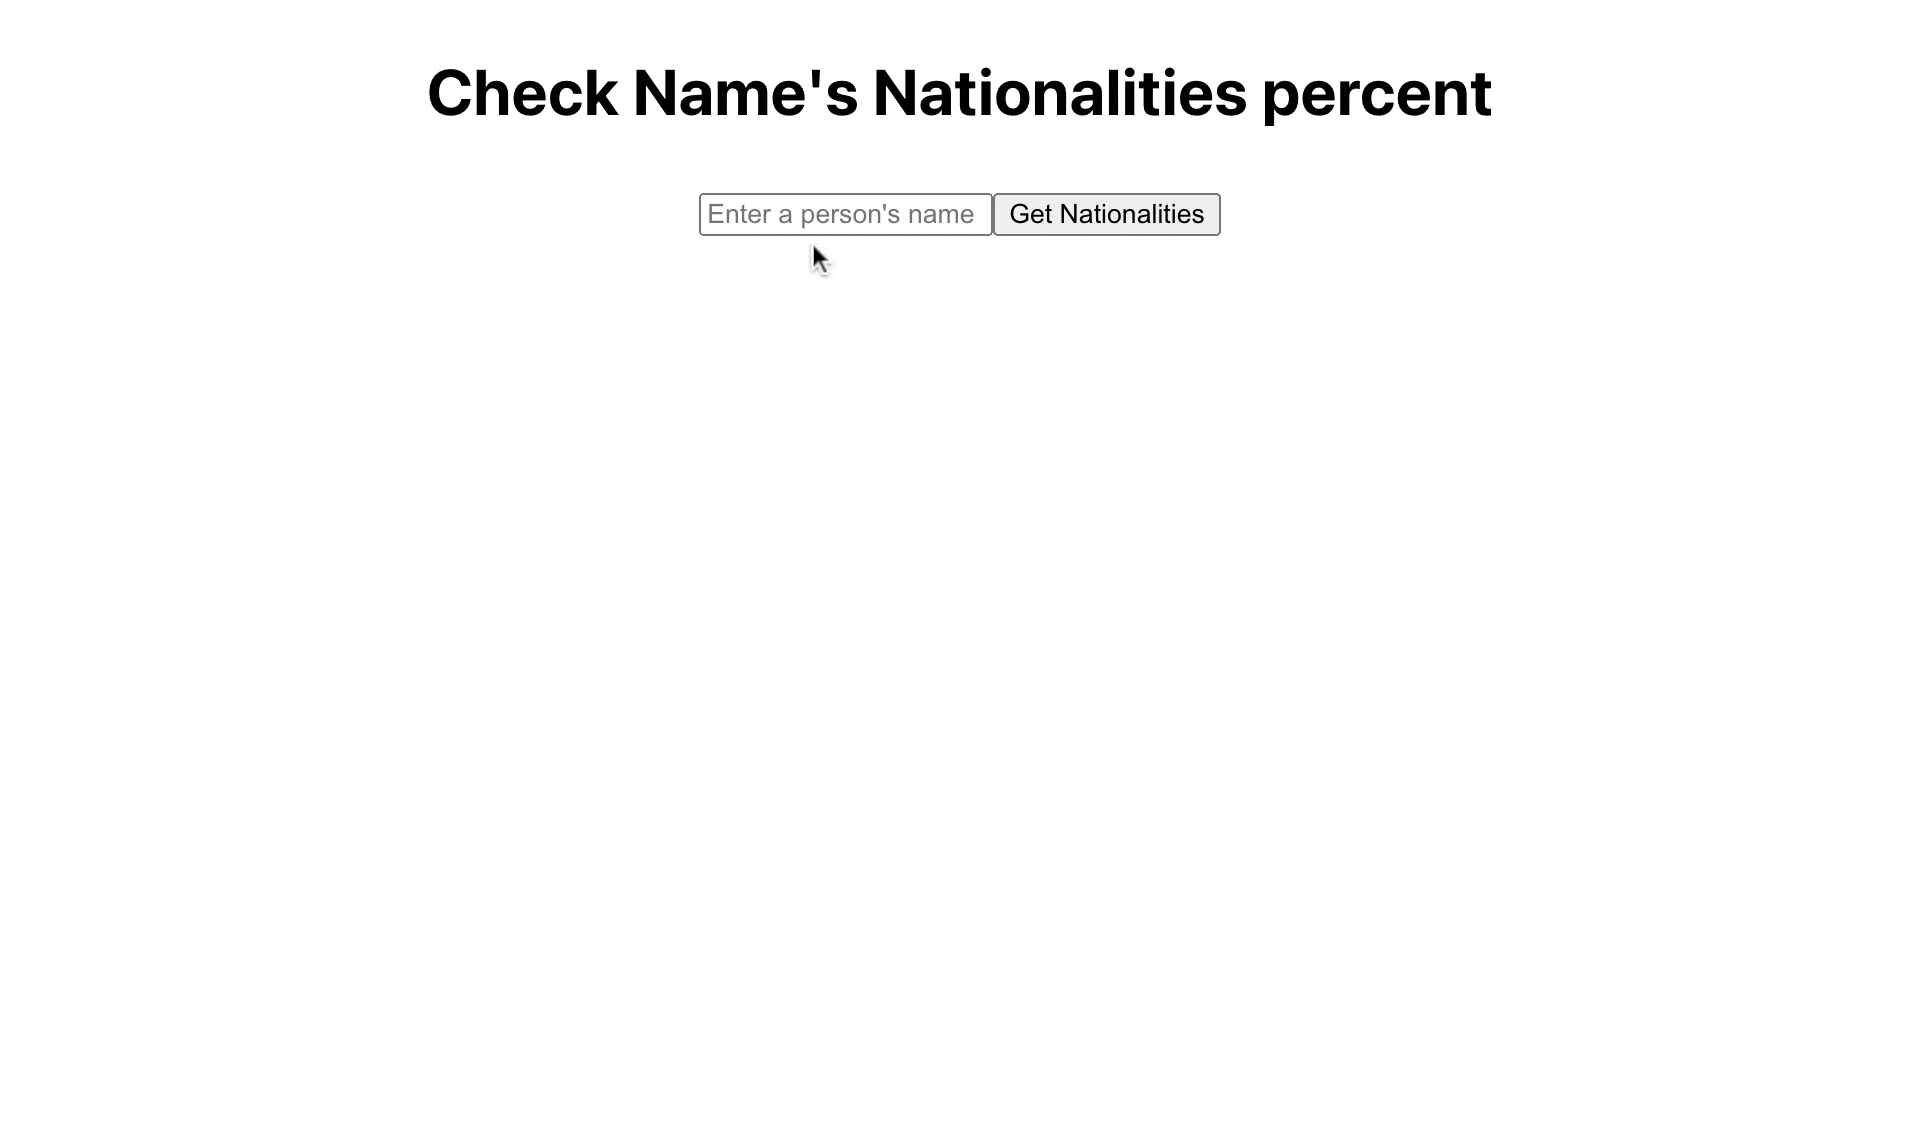 ReactJS app used to guess nationalities of a given name